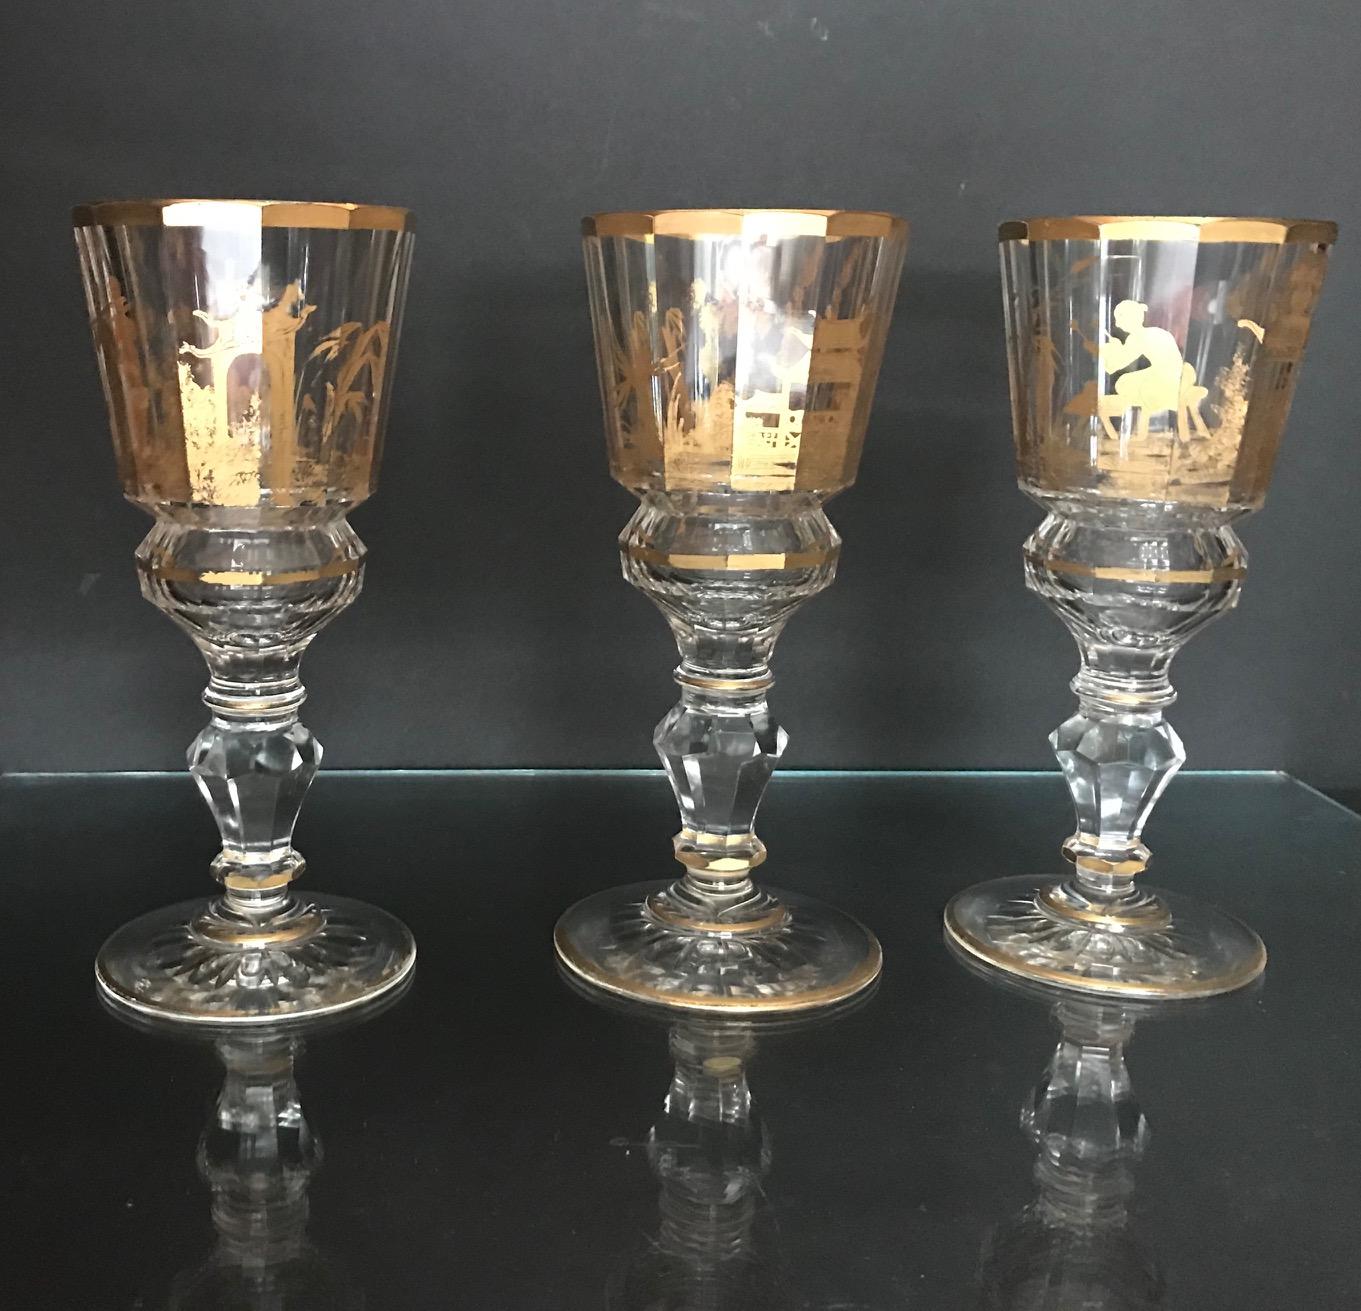 Three 18th century Bohemian facet cut gilded wine glasses, three goblets

These exquisite cut glasses are at the highest level of elegant and luxurious stemware. The base has different sizes of faceted knobs. A sunburst design is cut into the